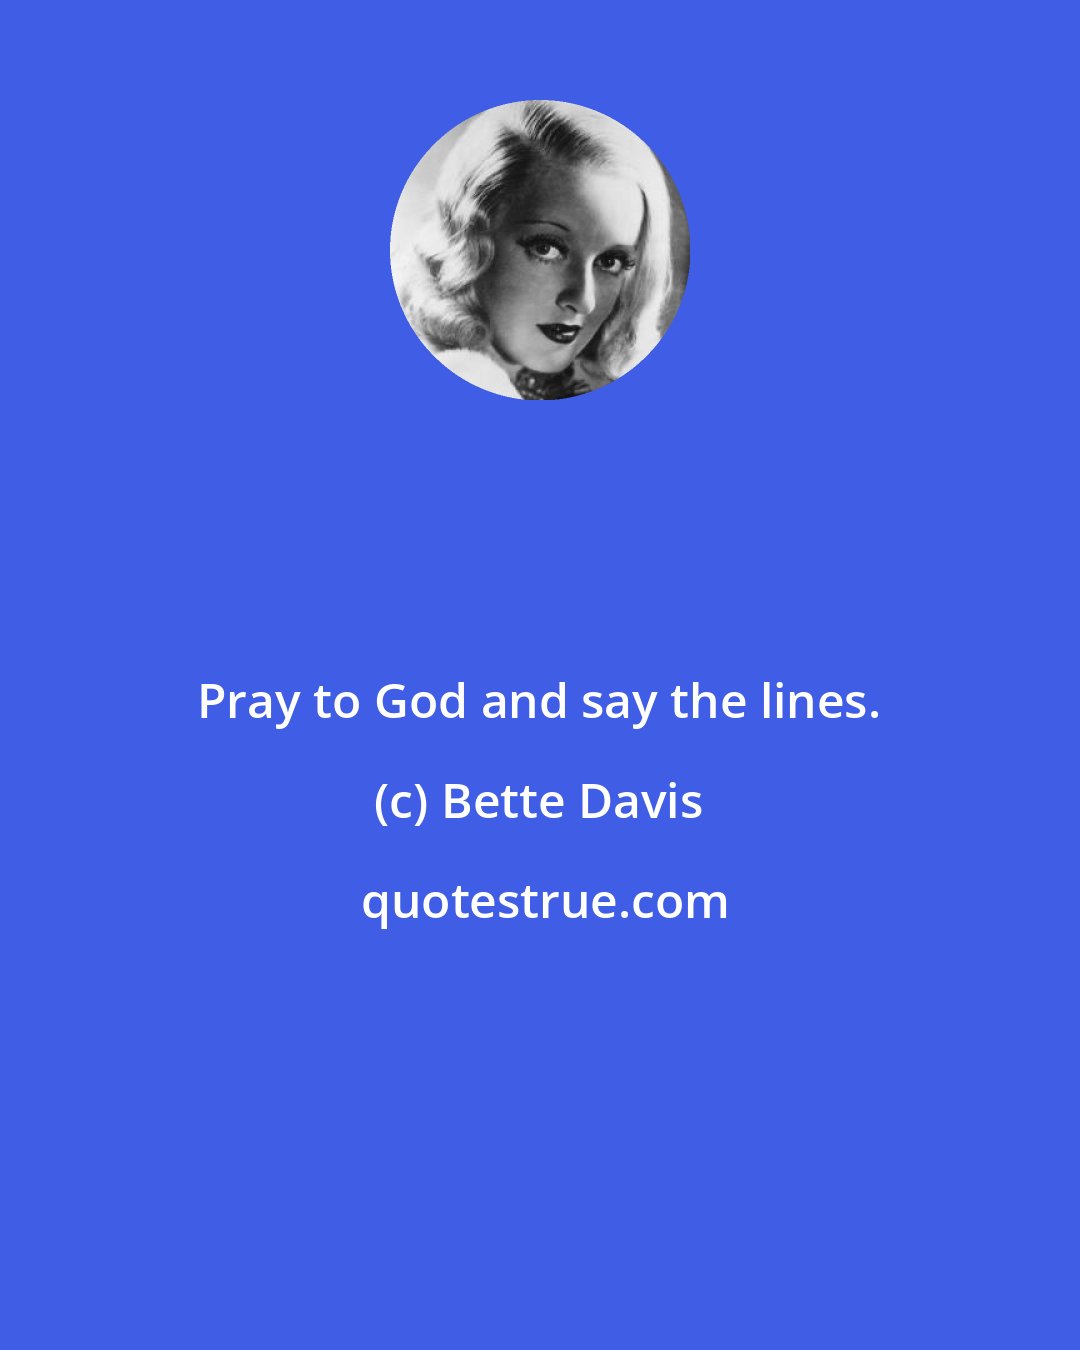 Bette Davis: Pray to God and say the lines.